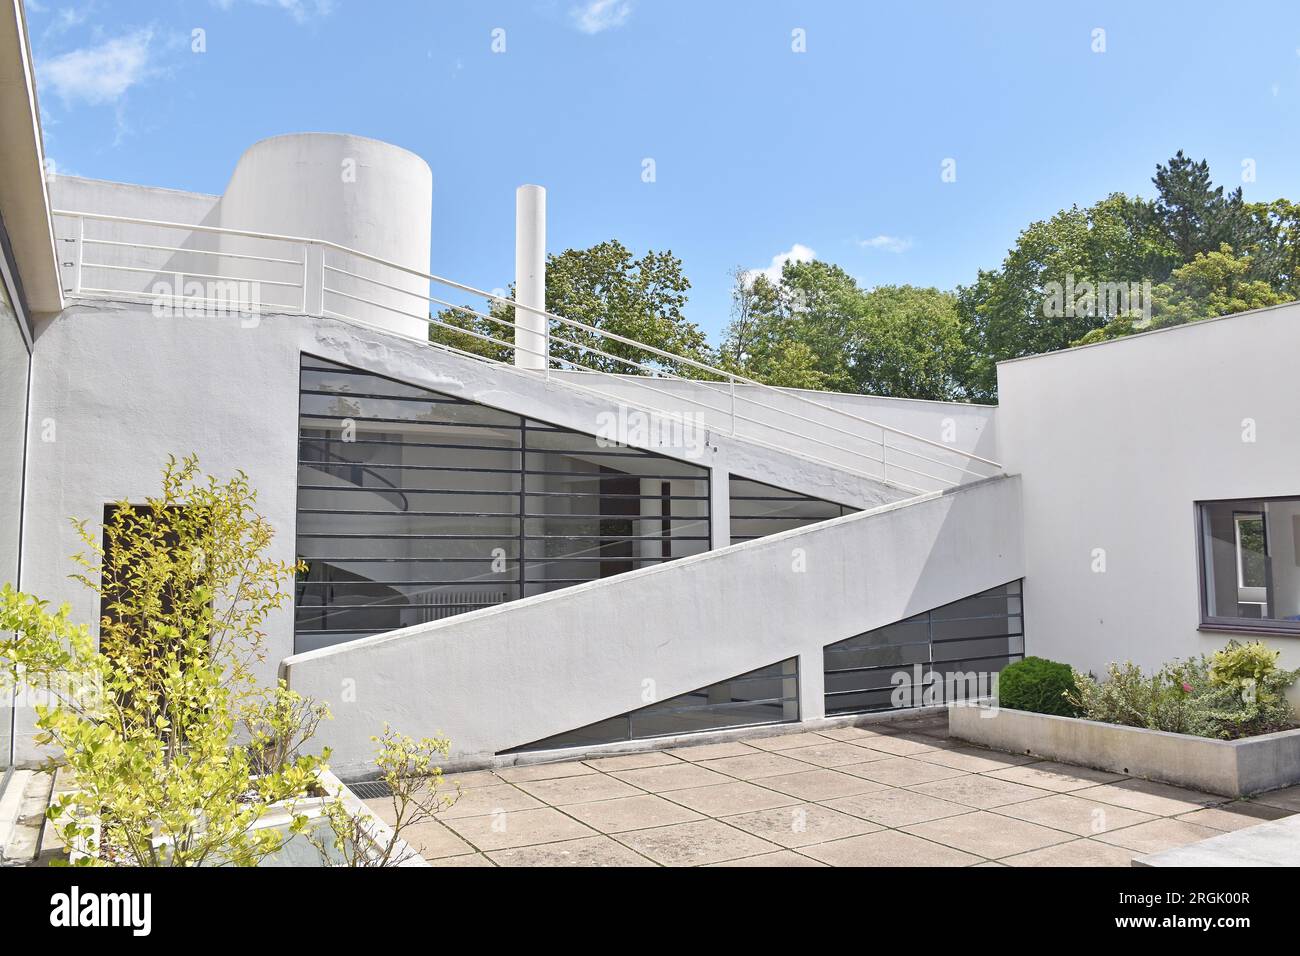 Villa Savoye, a masterpiece of the Modern Movement, architect Le Corbusier, built 1922-31, Purist style, ramp connecting lower & upper gardens Stock Photo